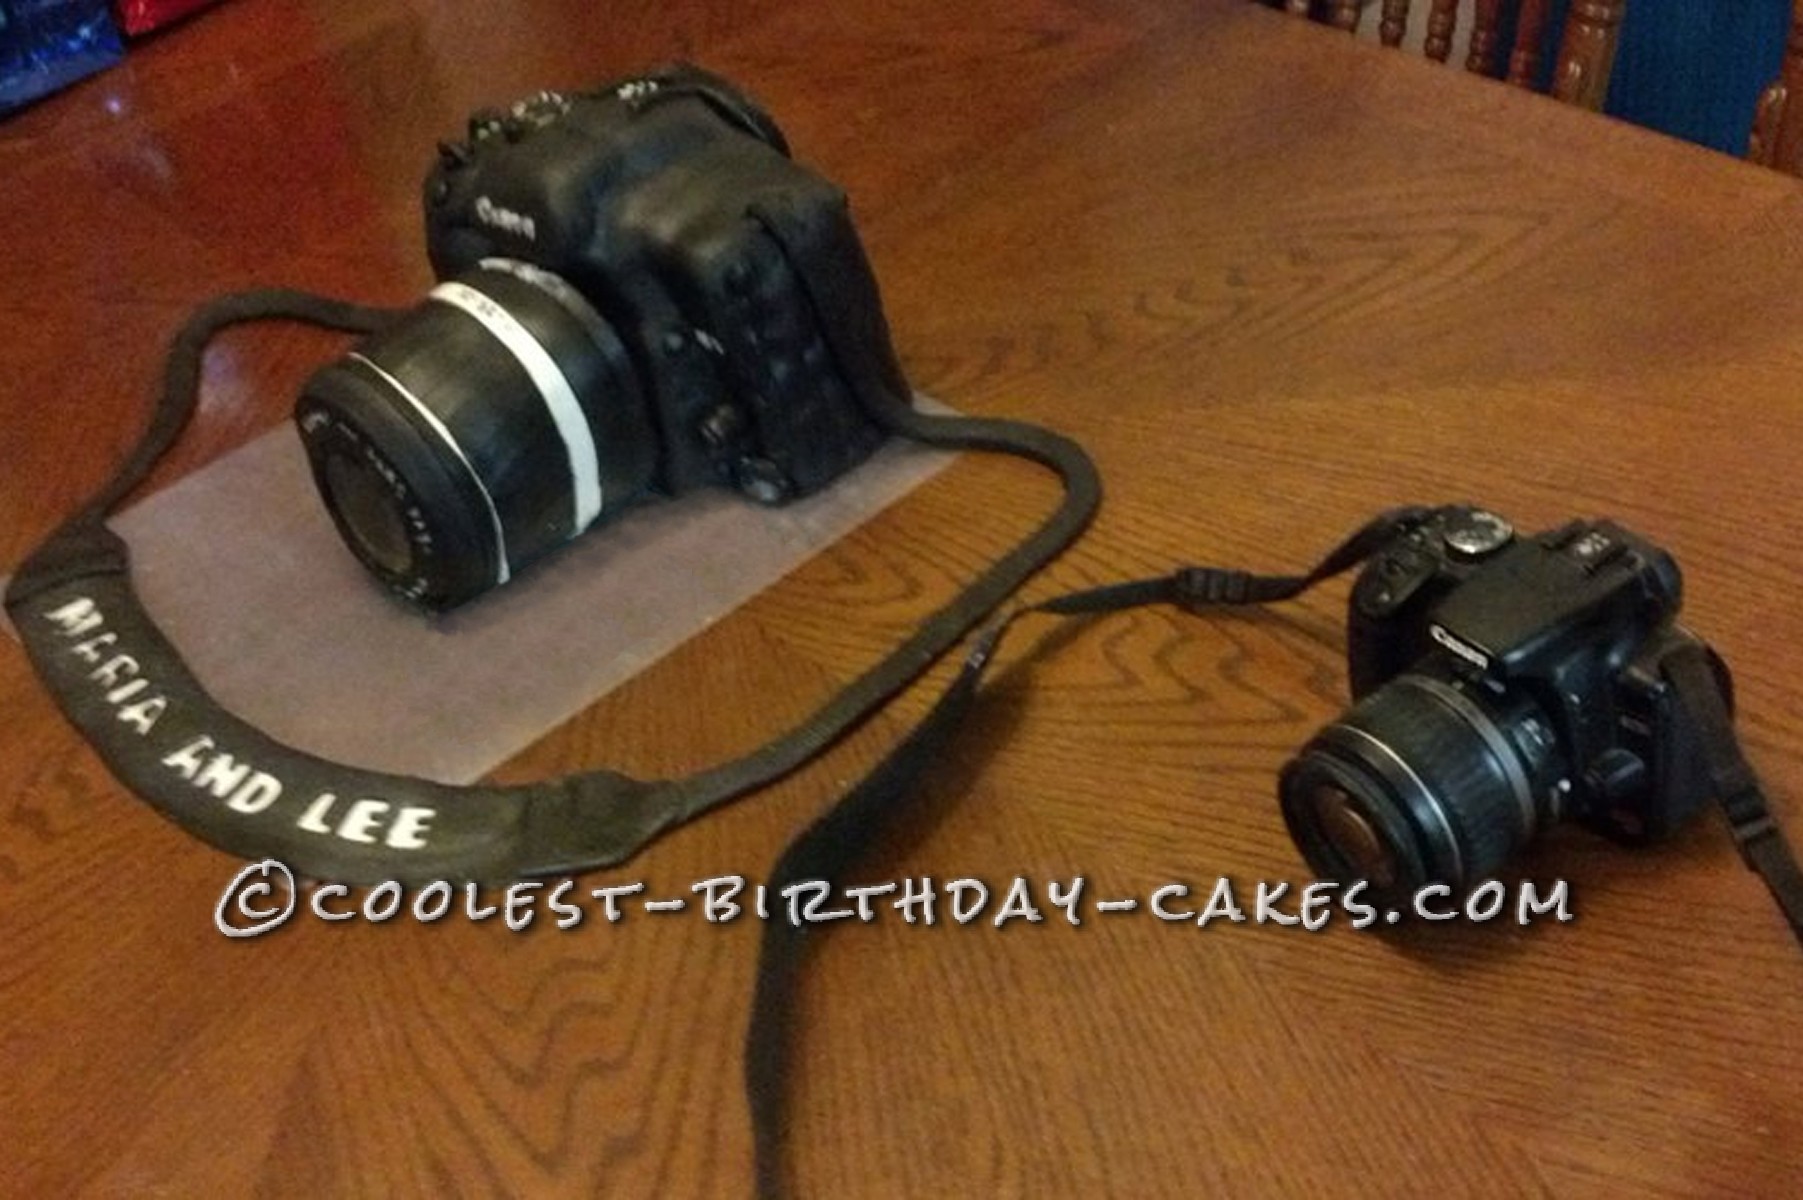 Side of Camera Cake in comparision with real camera